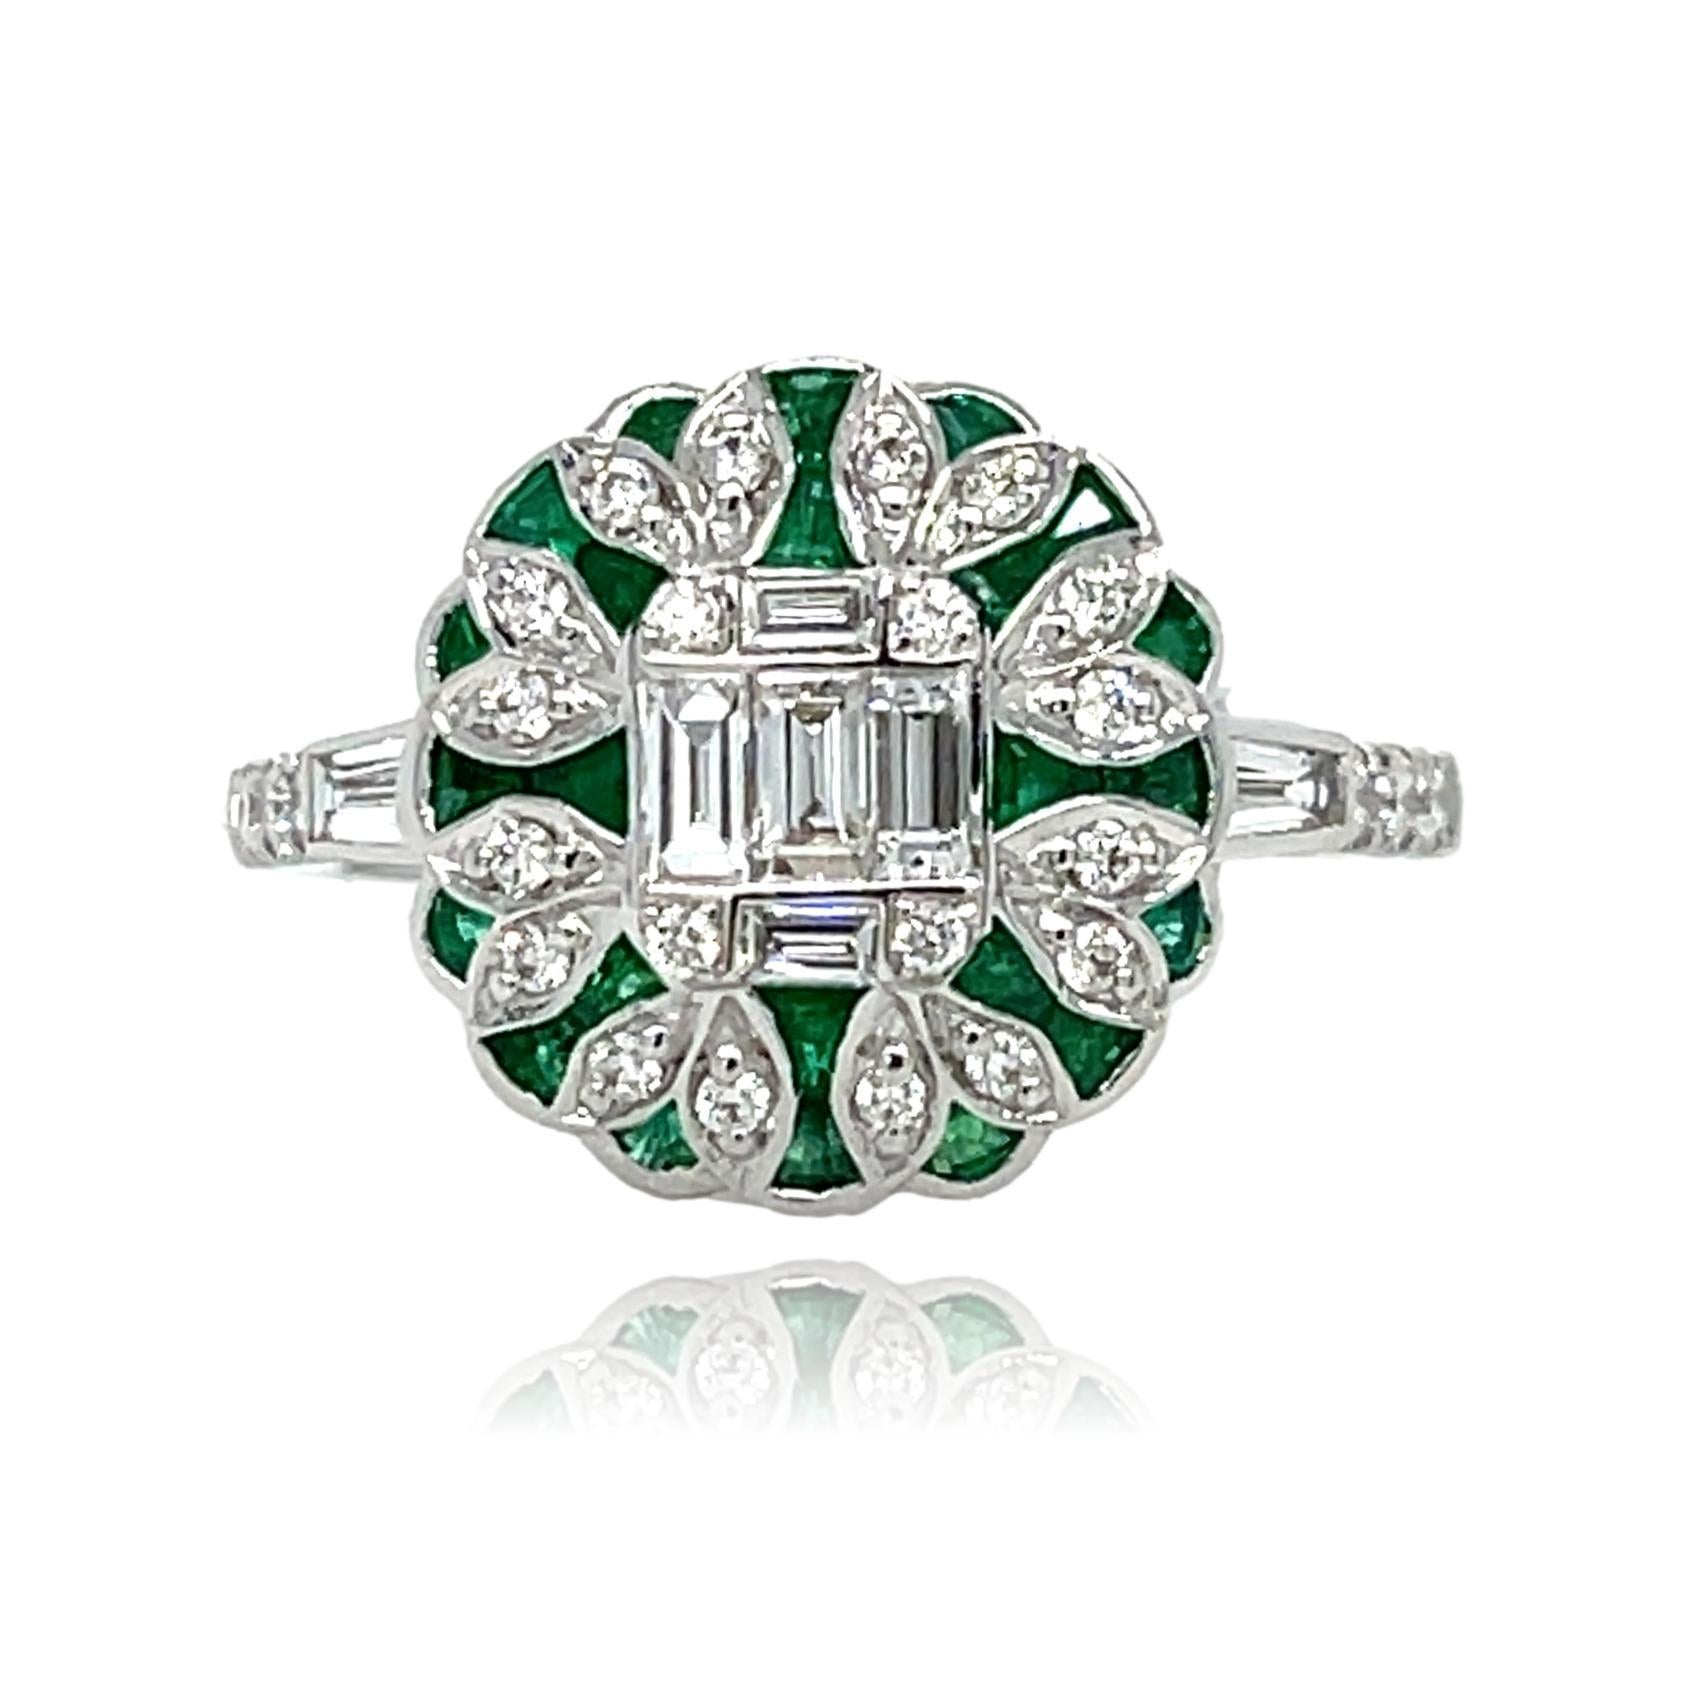 Women's Antique Emerald and Diamond Ring in 18k White Gold